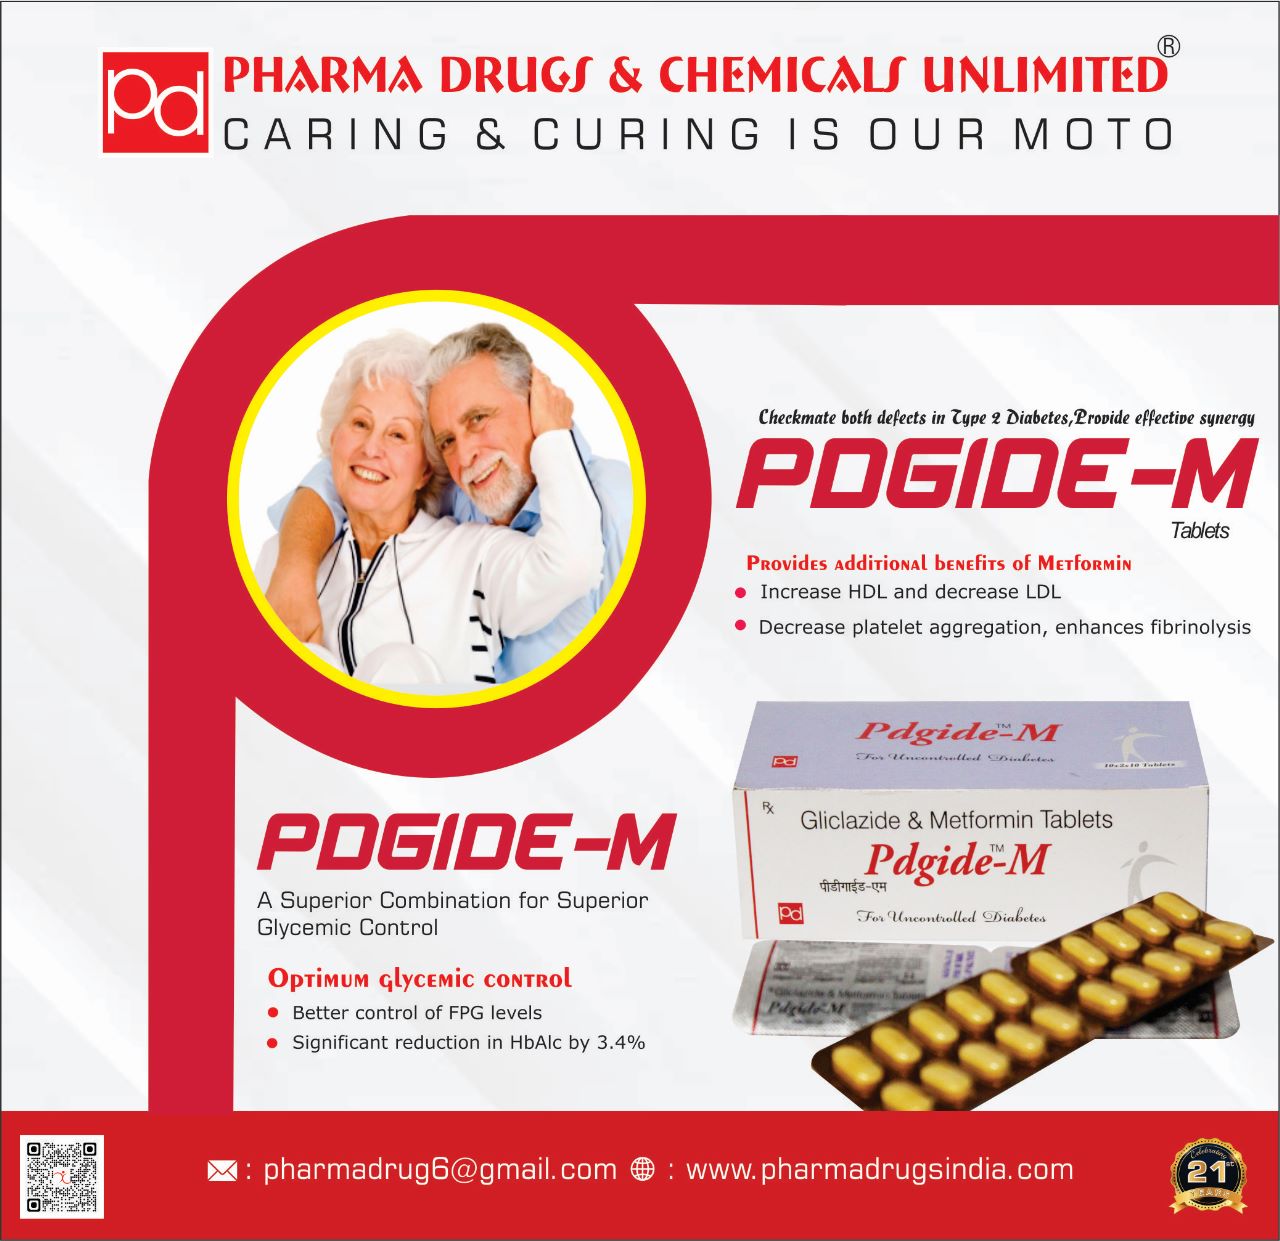 Product Name: Pdgide M, Compositions of Pdgide M are Gliclazide & Metfortin Tablets - Pharma Drugs and Chemicals